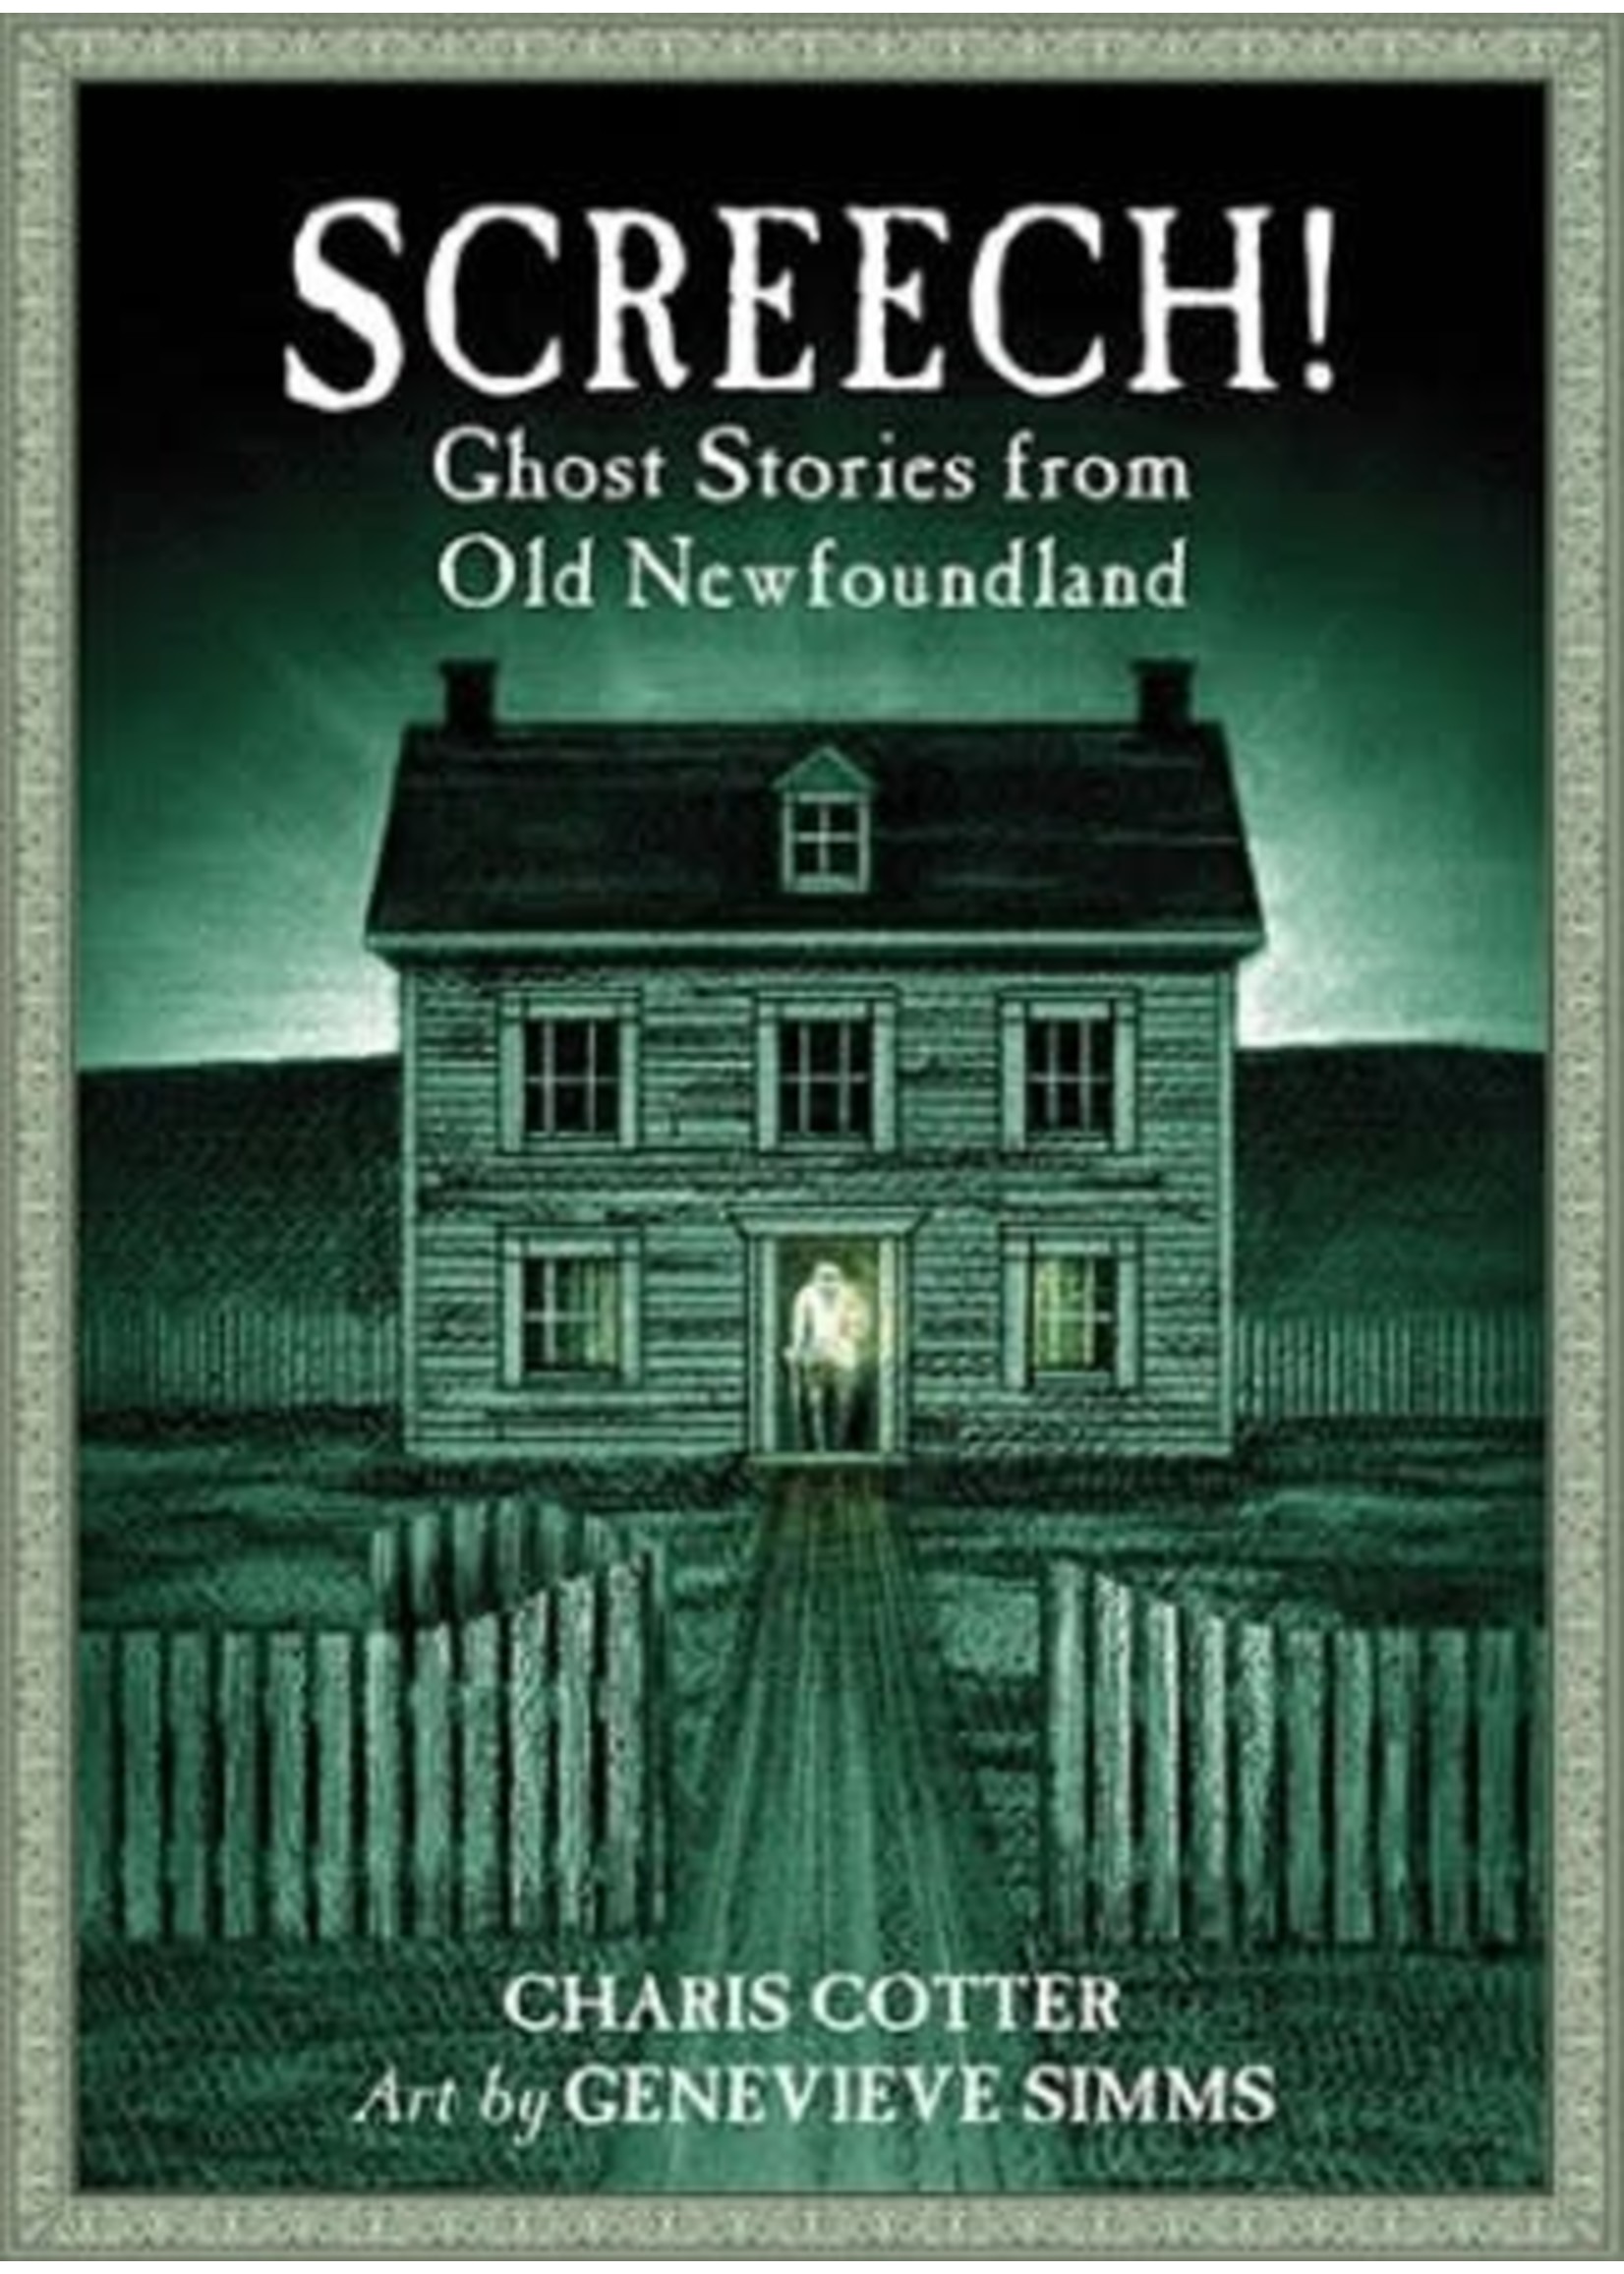 Screech! Ghost Stories from Old Newfoundland by Charis Cotter